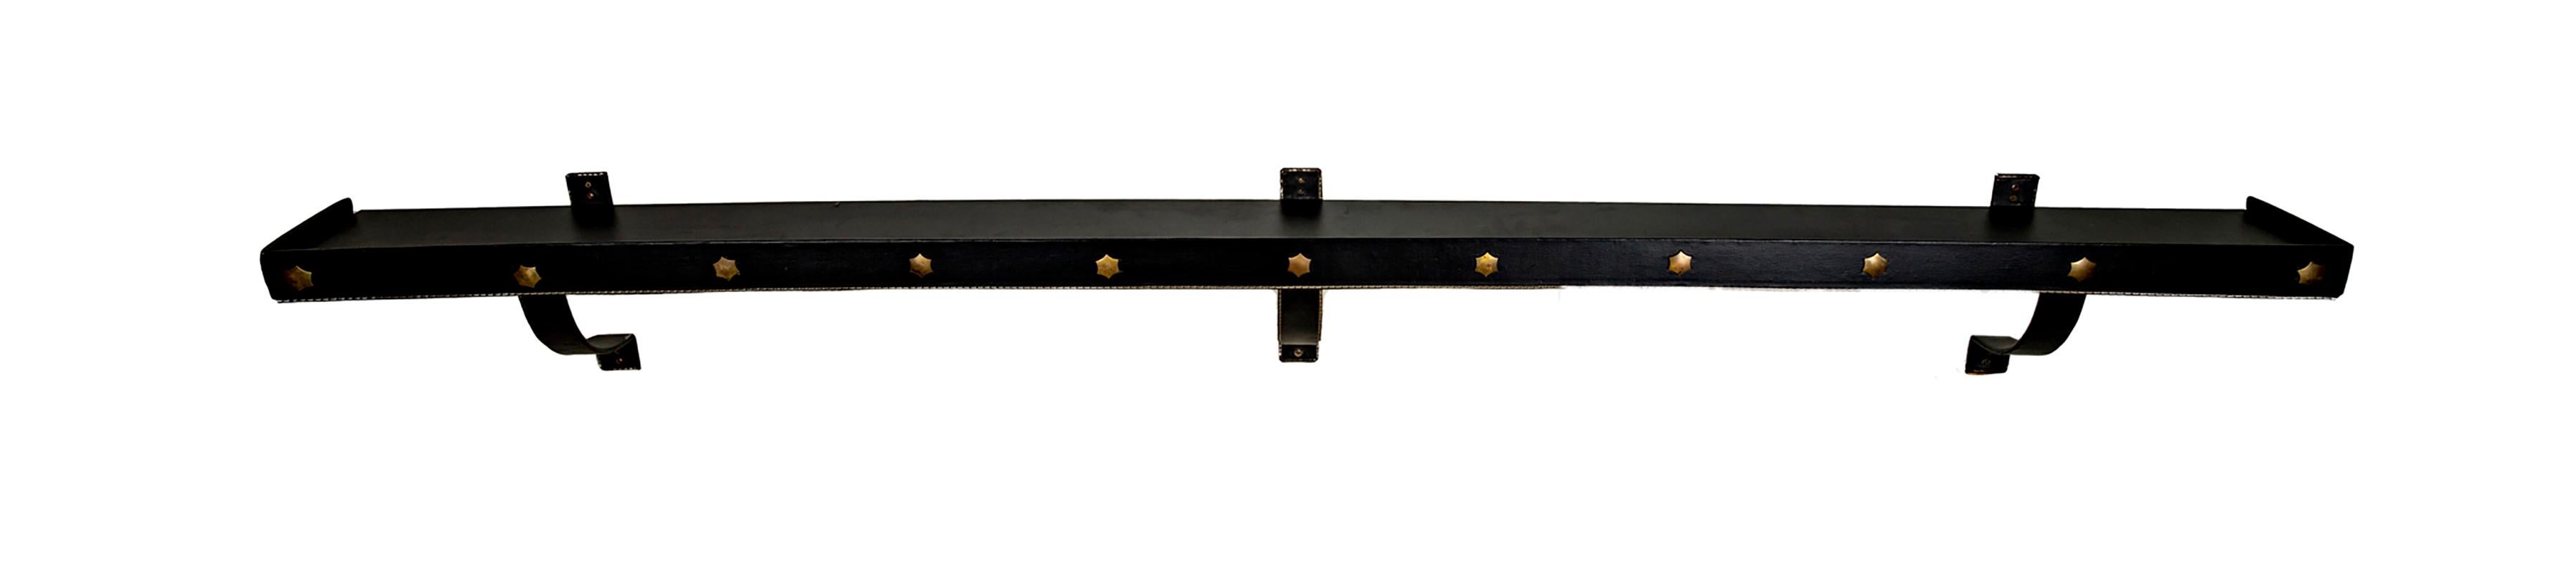 Jacques Adnet Leather Wrapped Wall Shelf For Sale 1